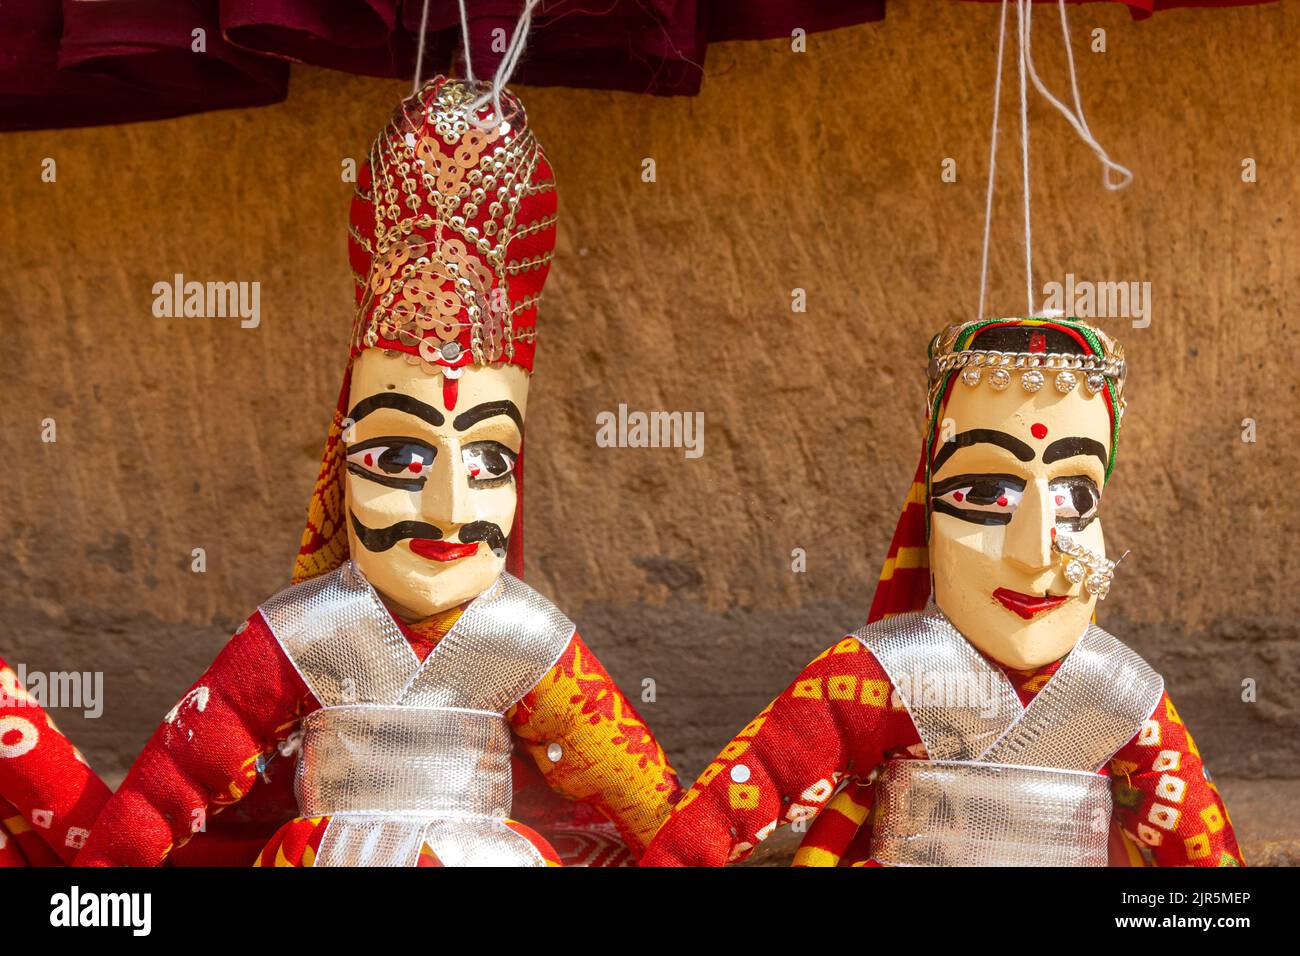 The Traditional Puppets on Roadside for the Sale, Jaisalmer, Rajasthan, India. Stock Photo